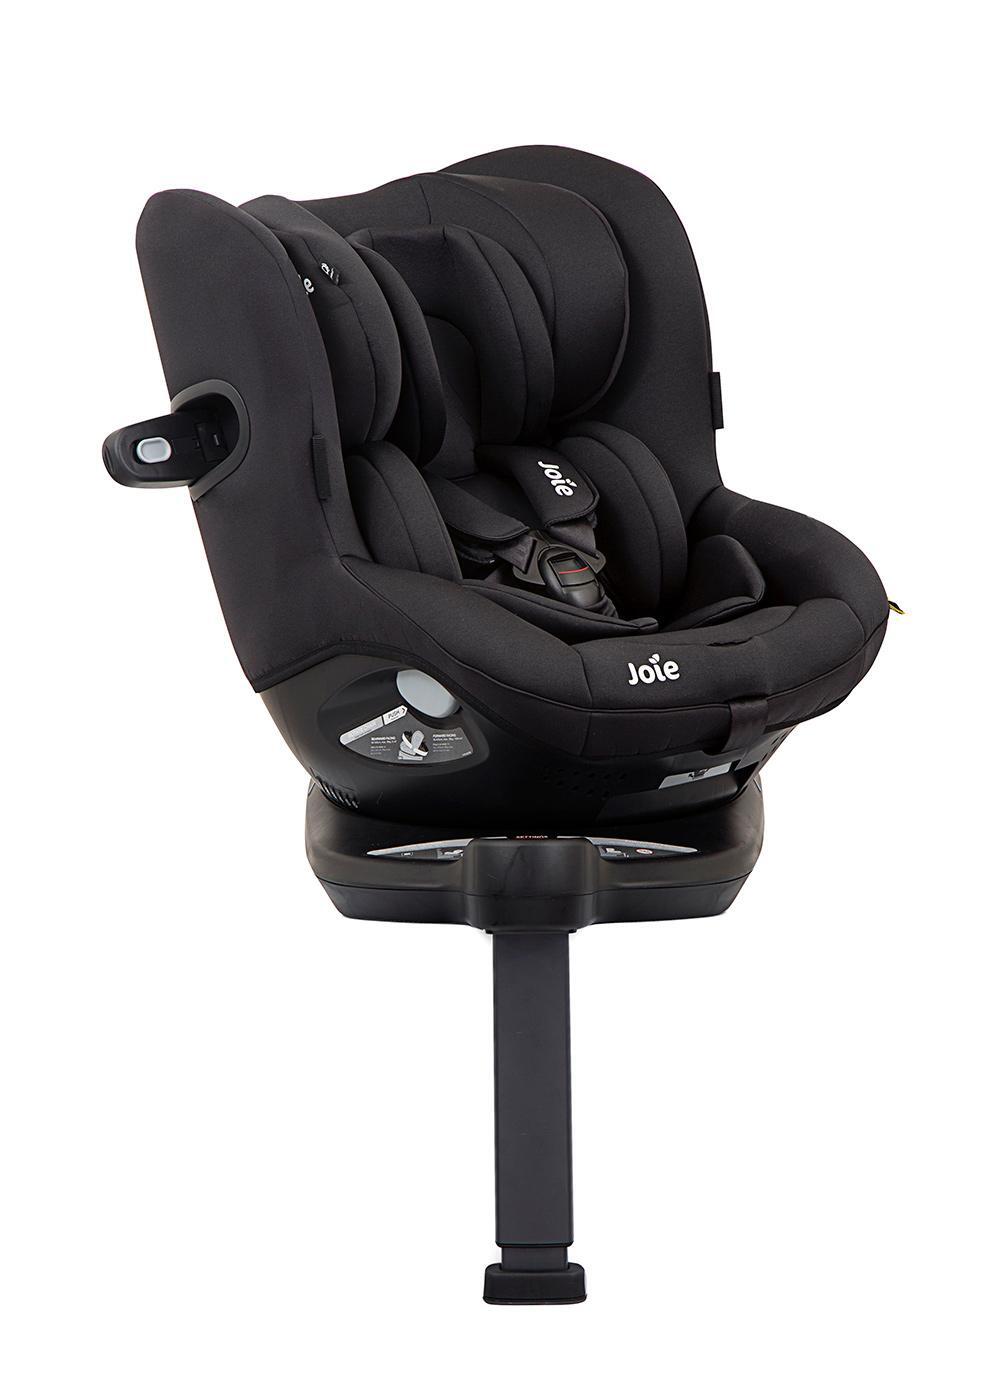 Joie I-Spin 360 Car Seat, 40-105cm